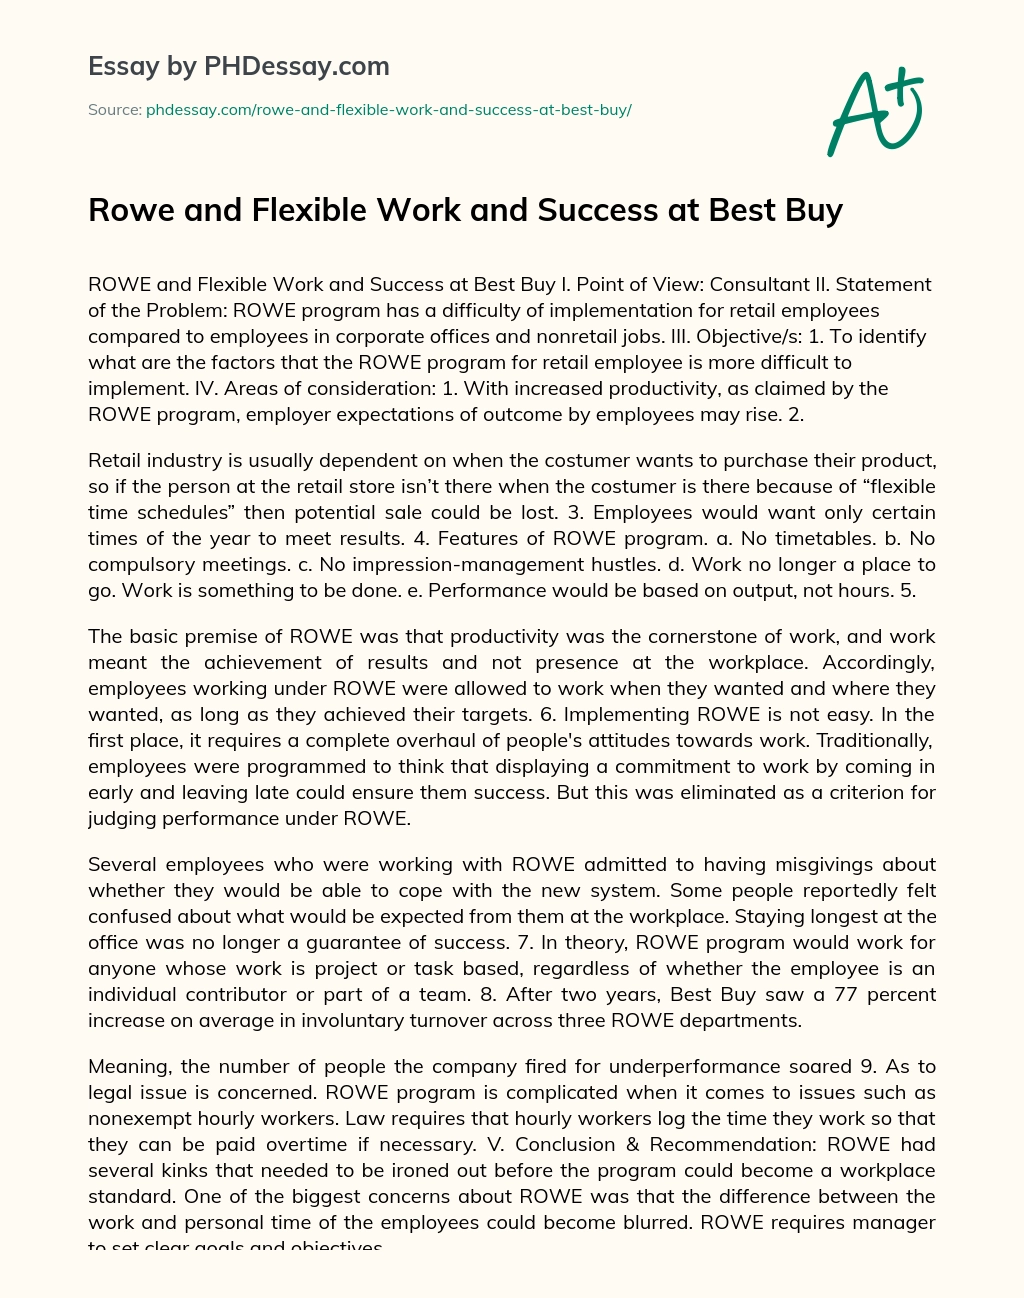 Rowe and Flexible Work and Success at Best Buy essay